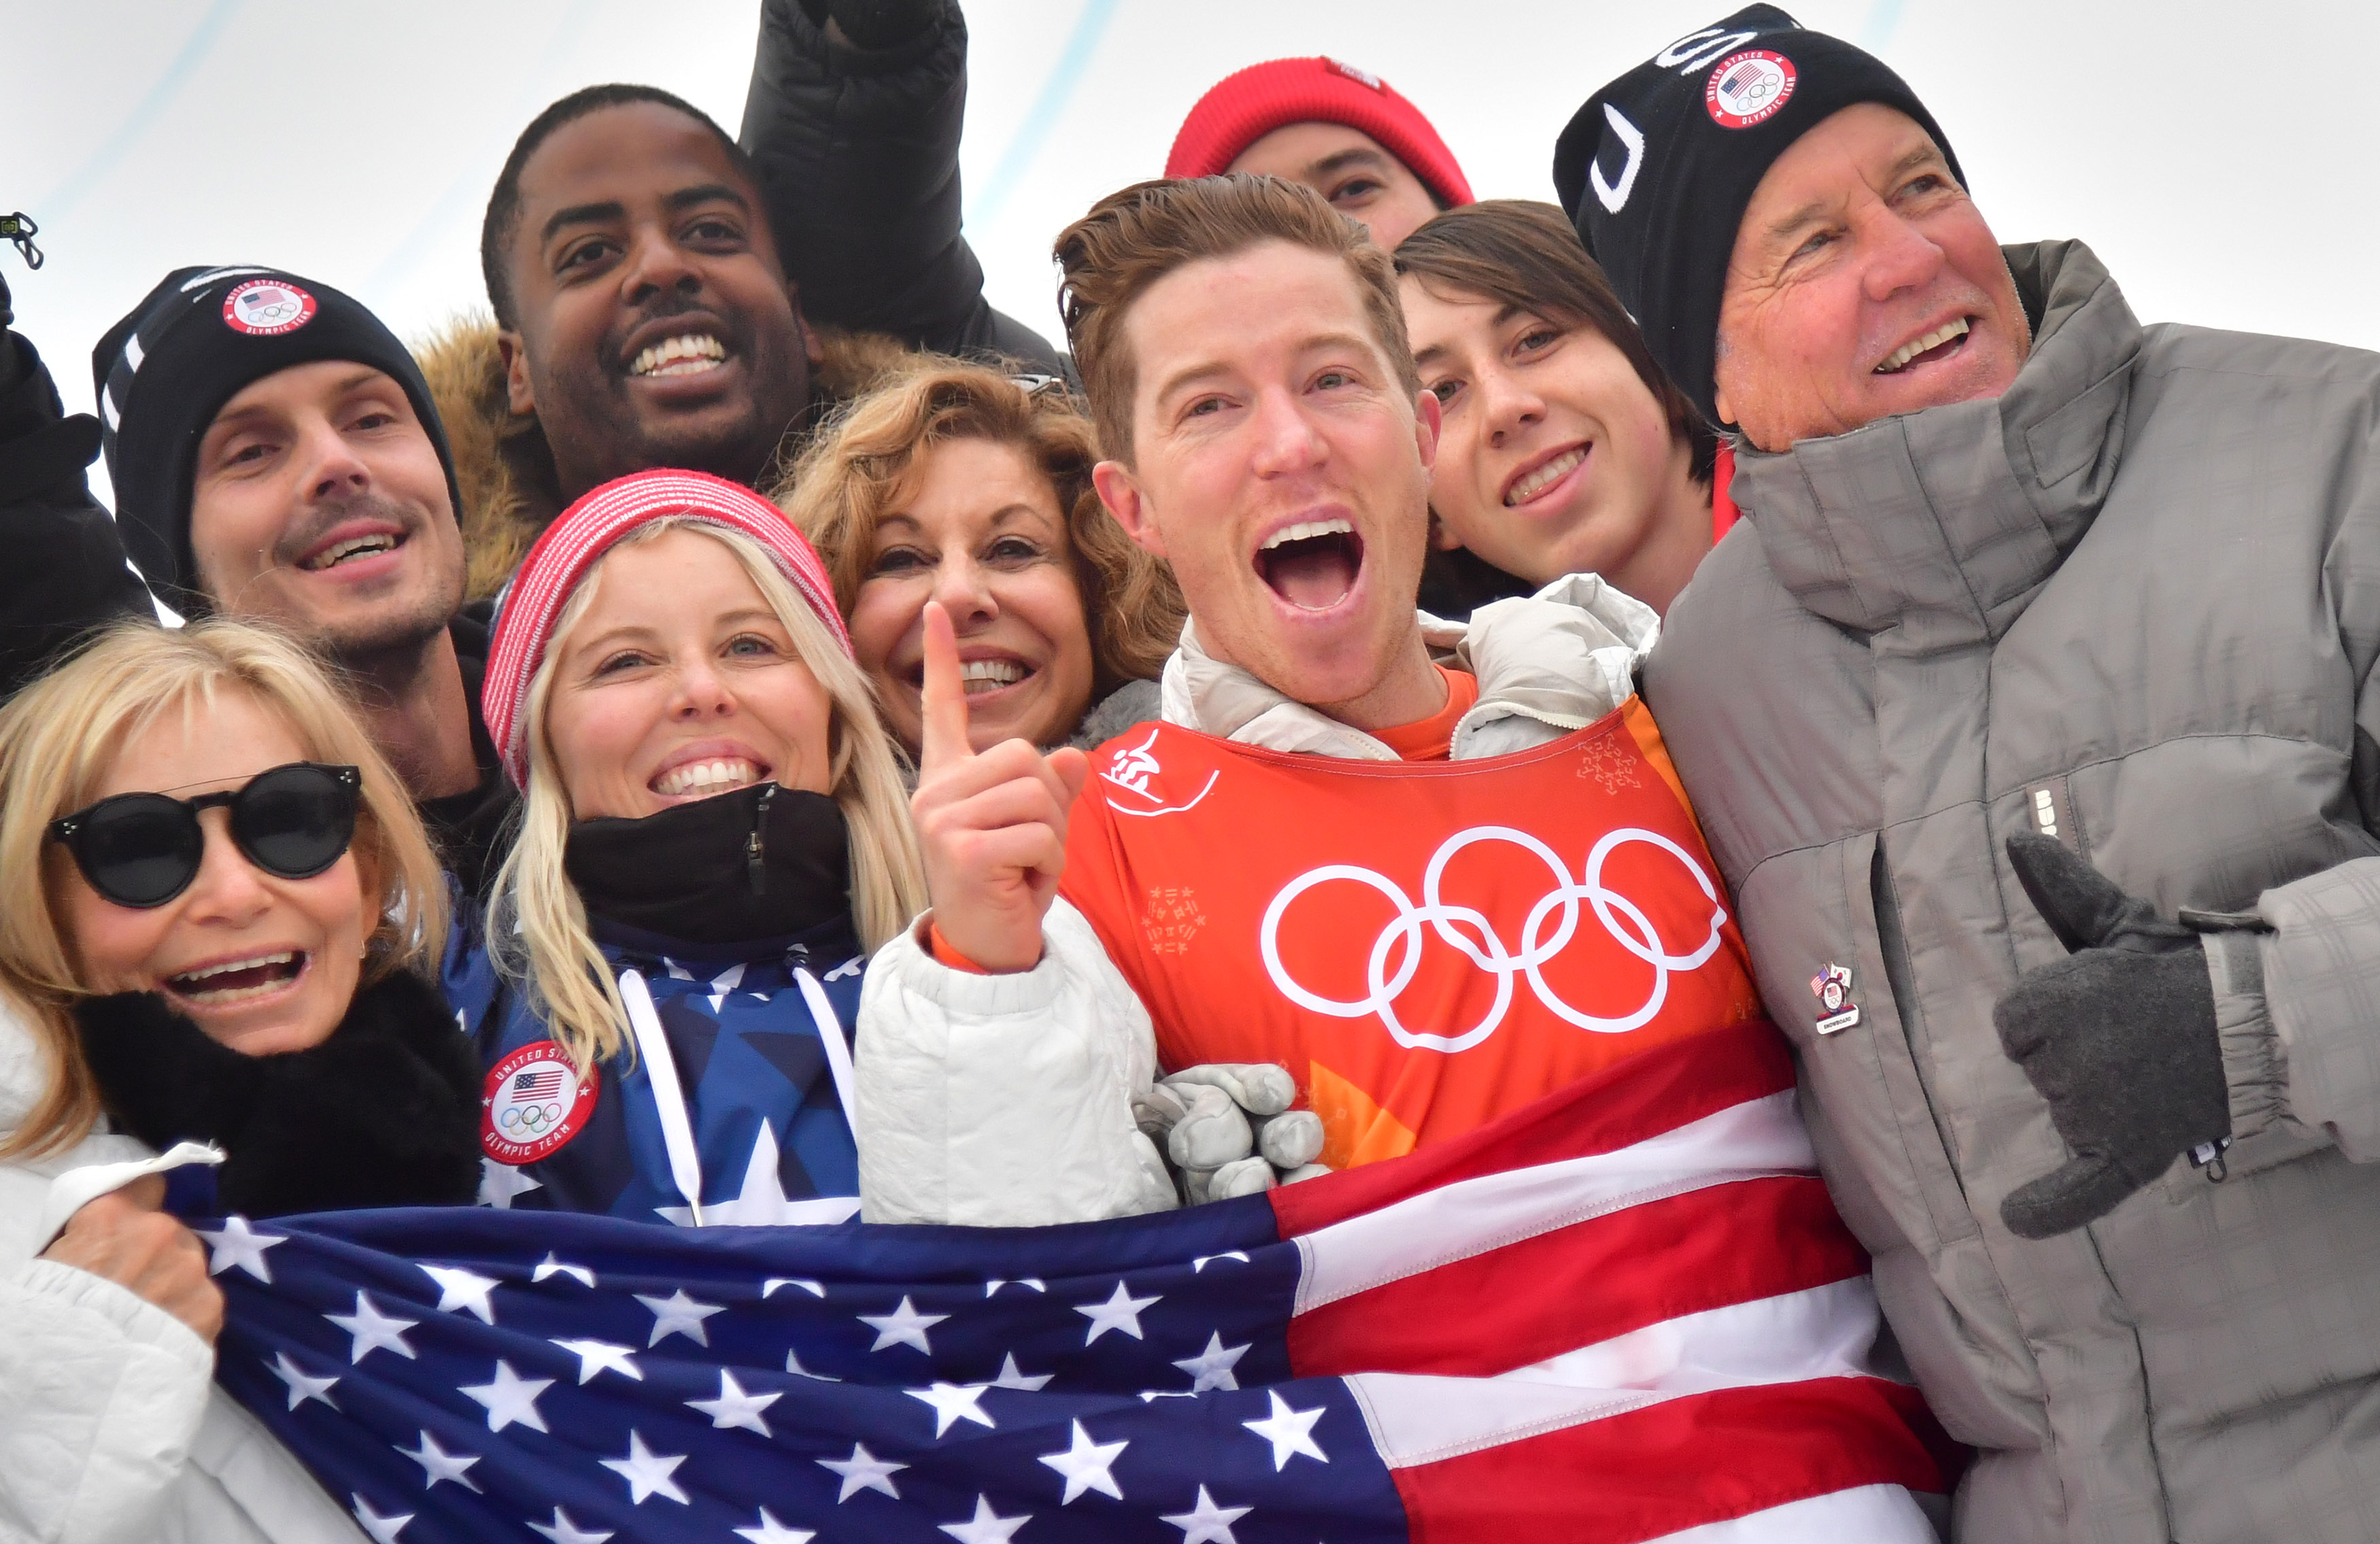 Shaun White: It's not about money, models; it's family 